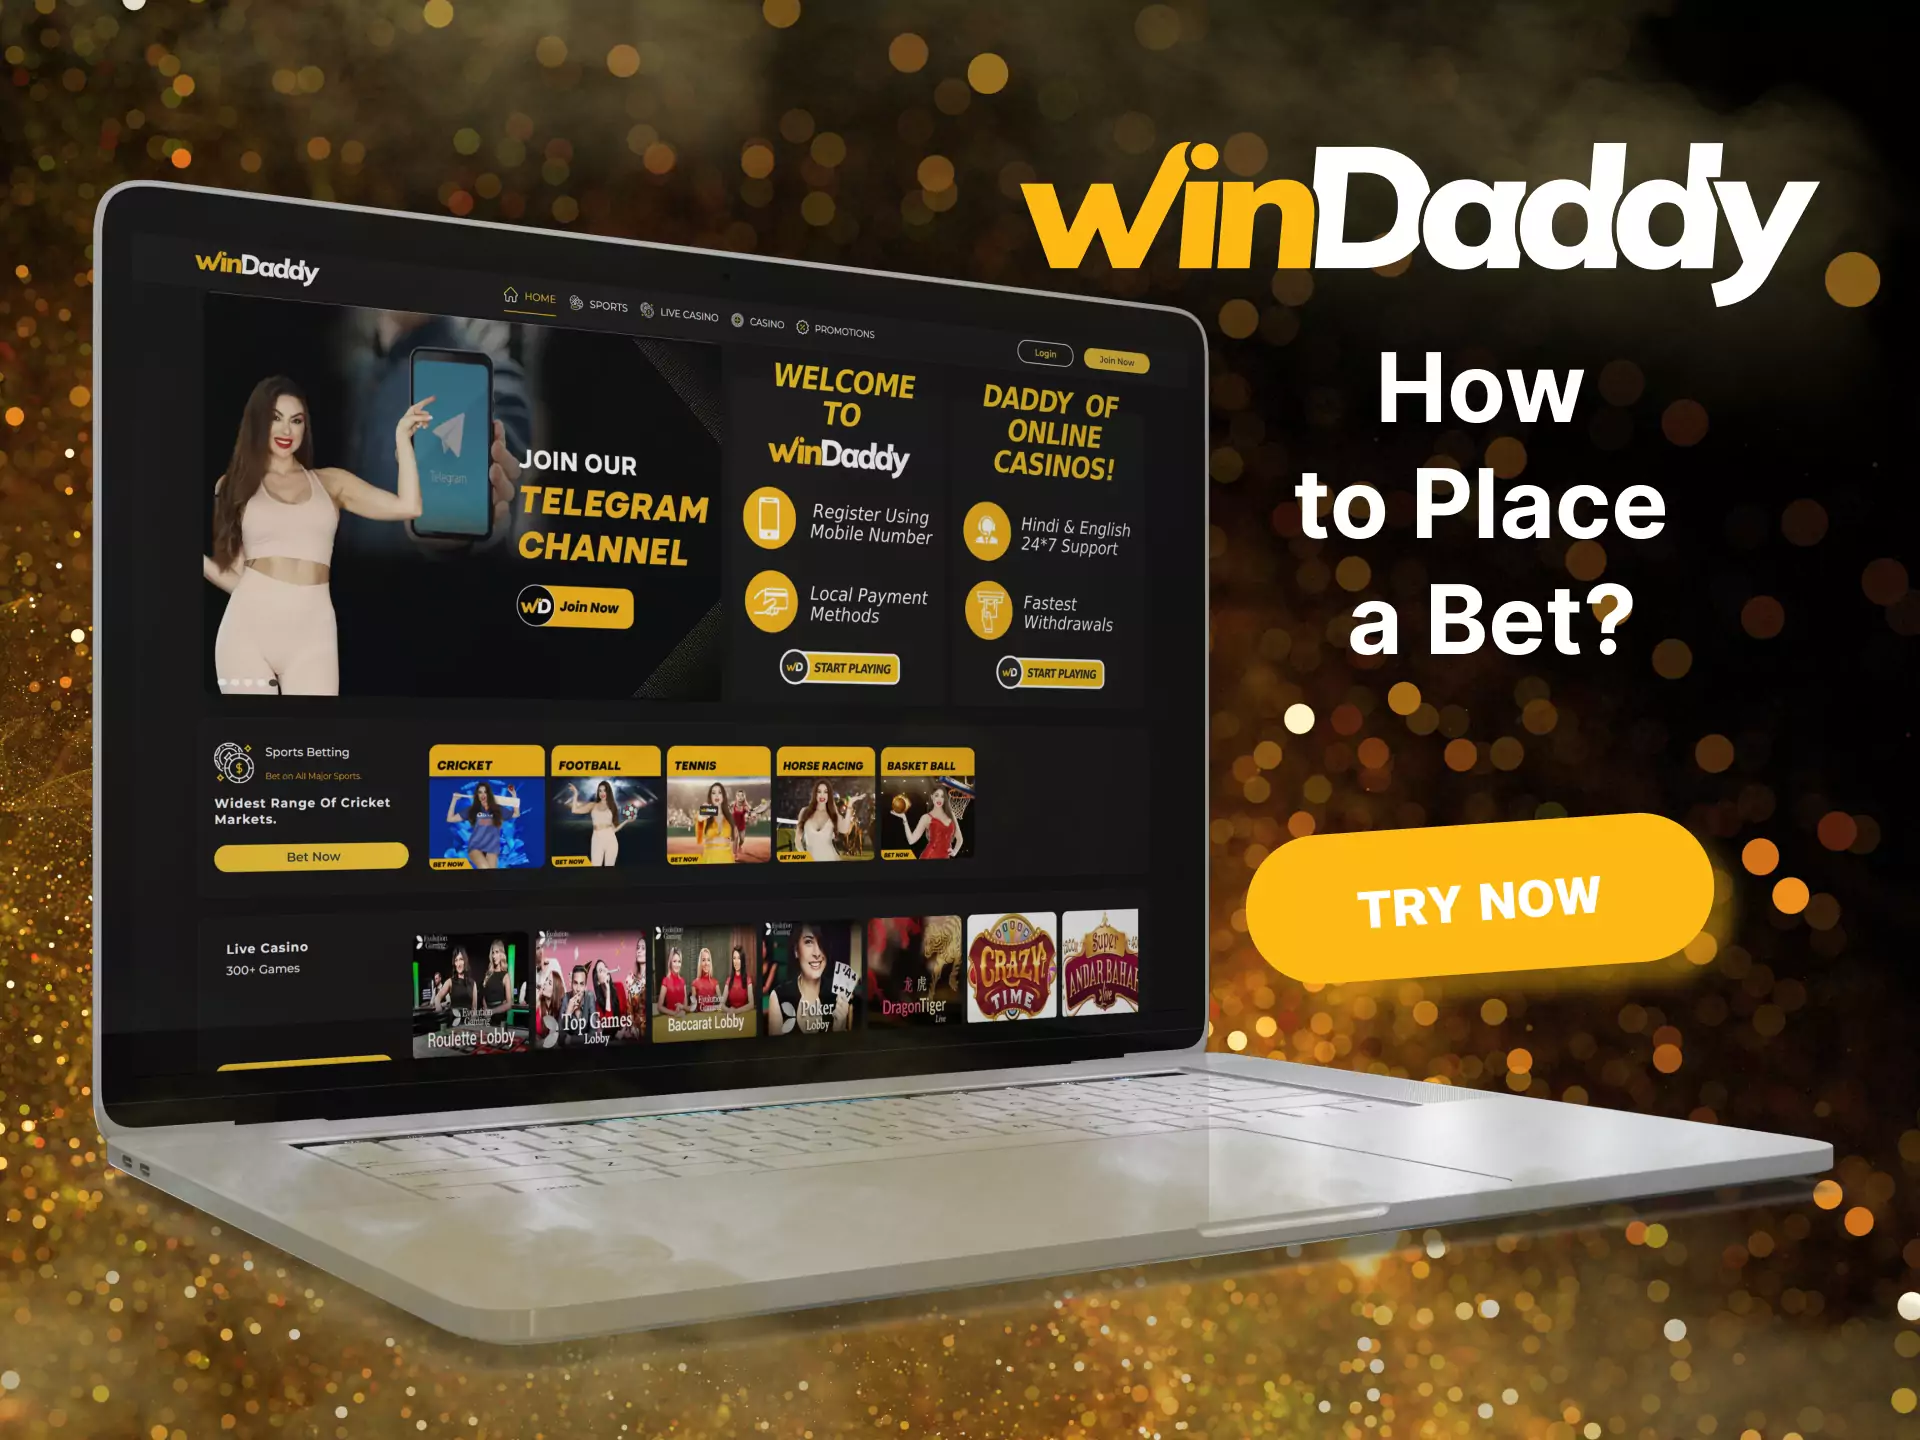 Use this instruction to place your bet on Windaddy.